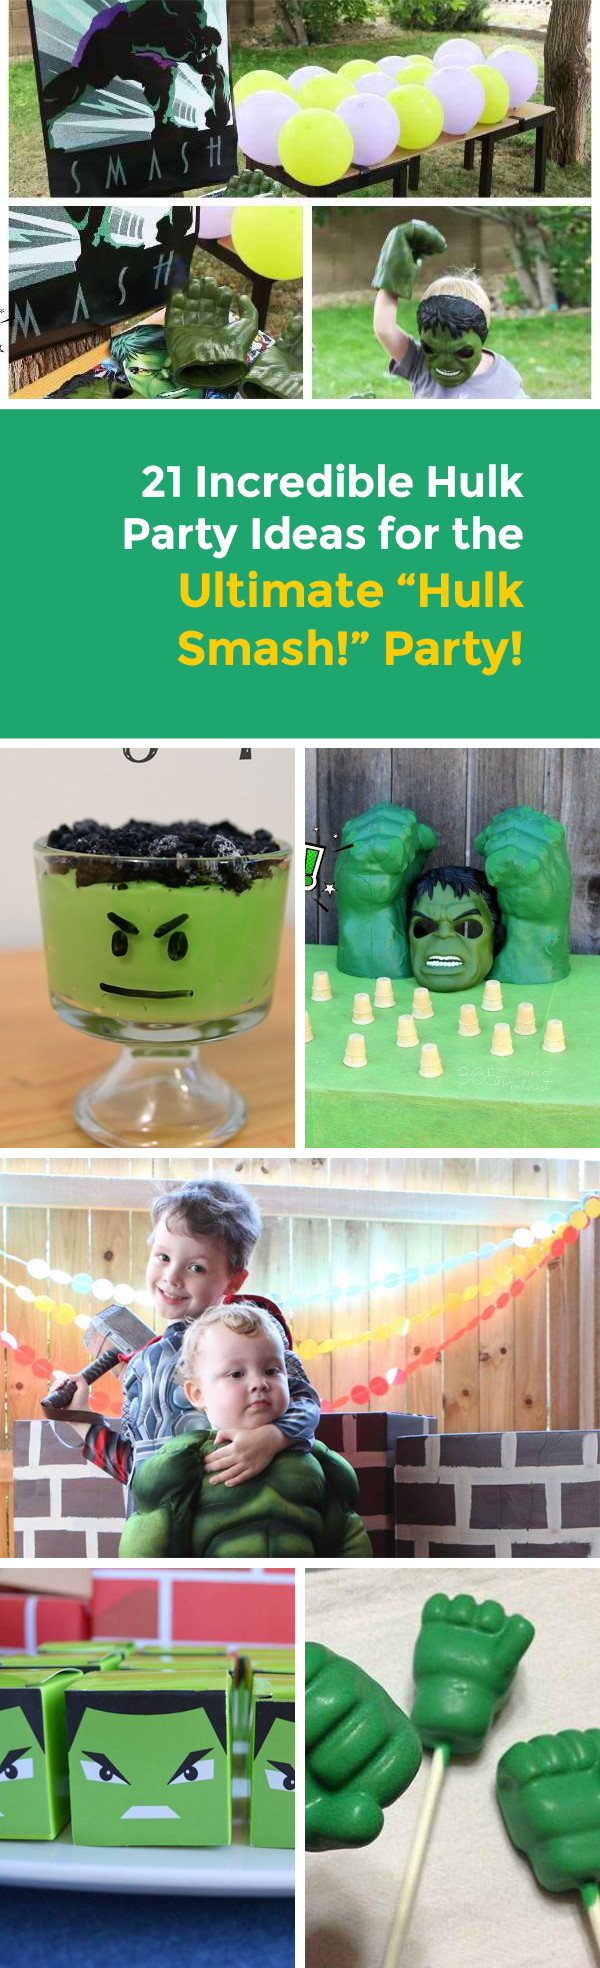 Hulk Birthday Party Supplies
 24 Incredible Hulk Party Ideas for the Ultimate “Hulk